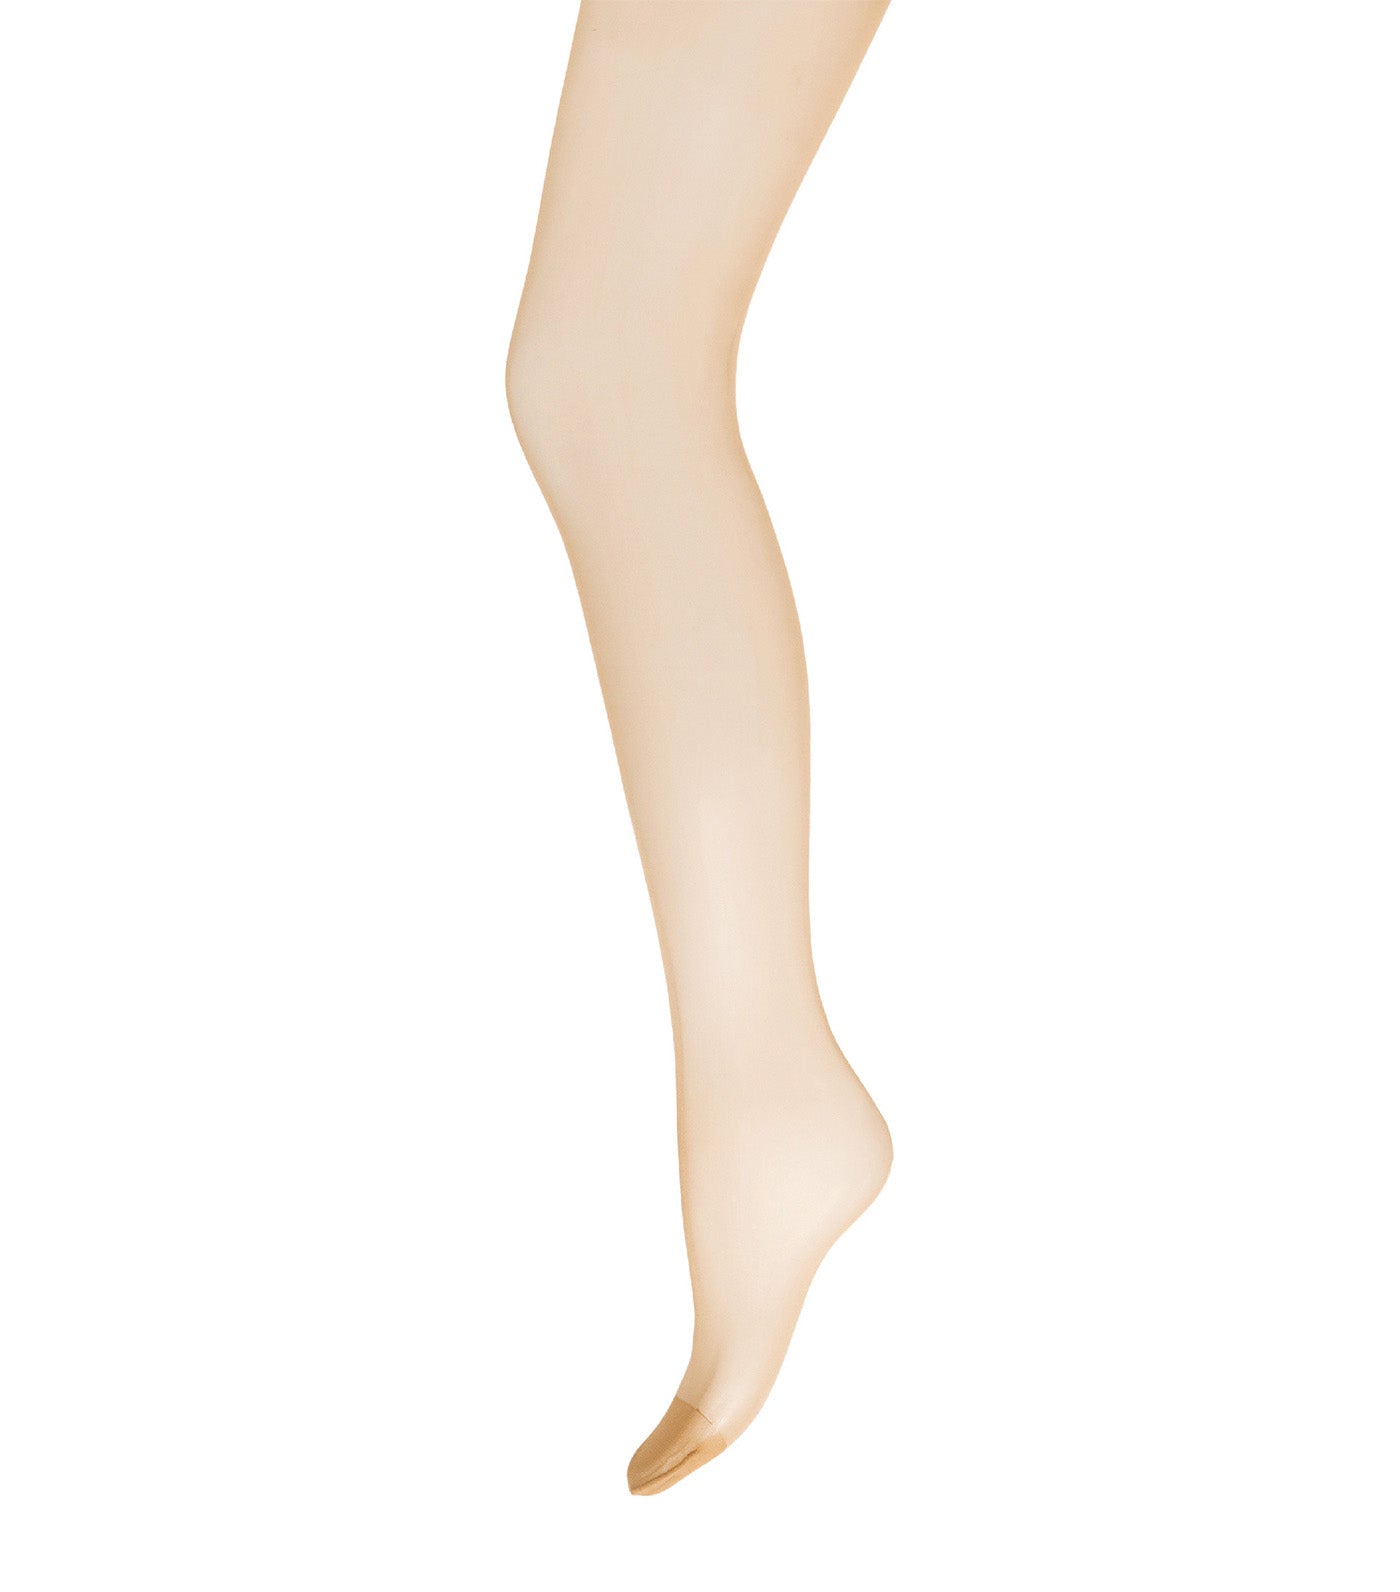 Wolford Pure 10 Tights Cosmetic